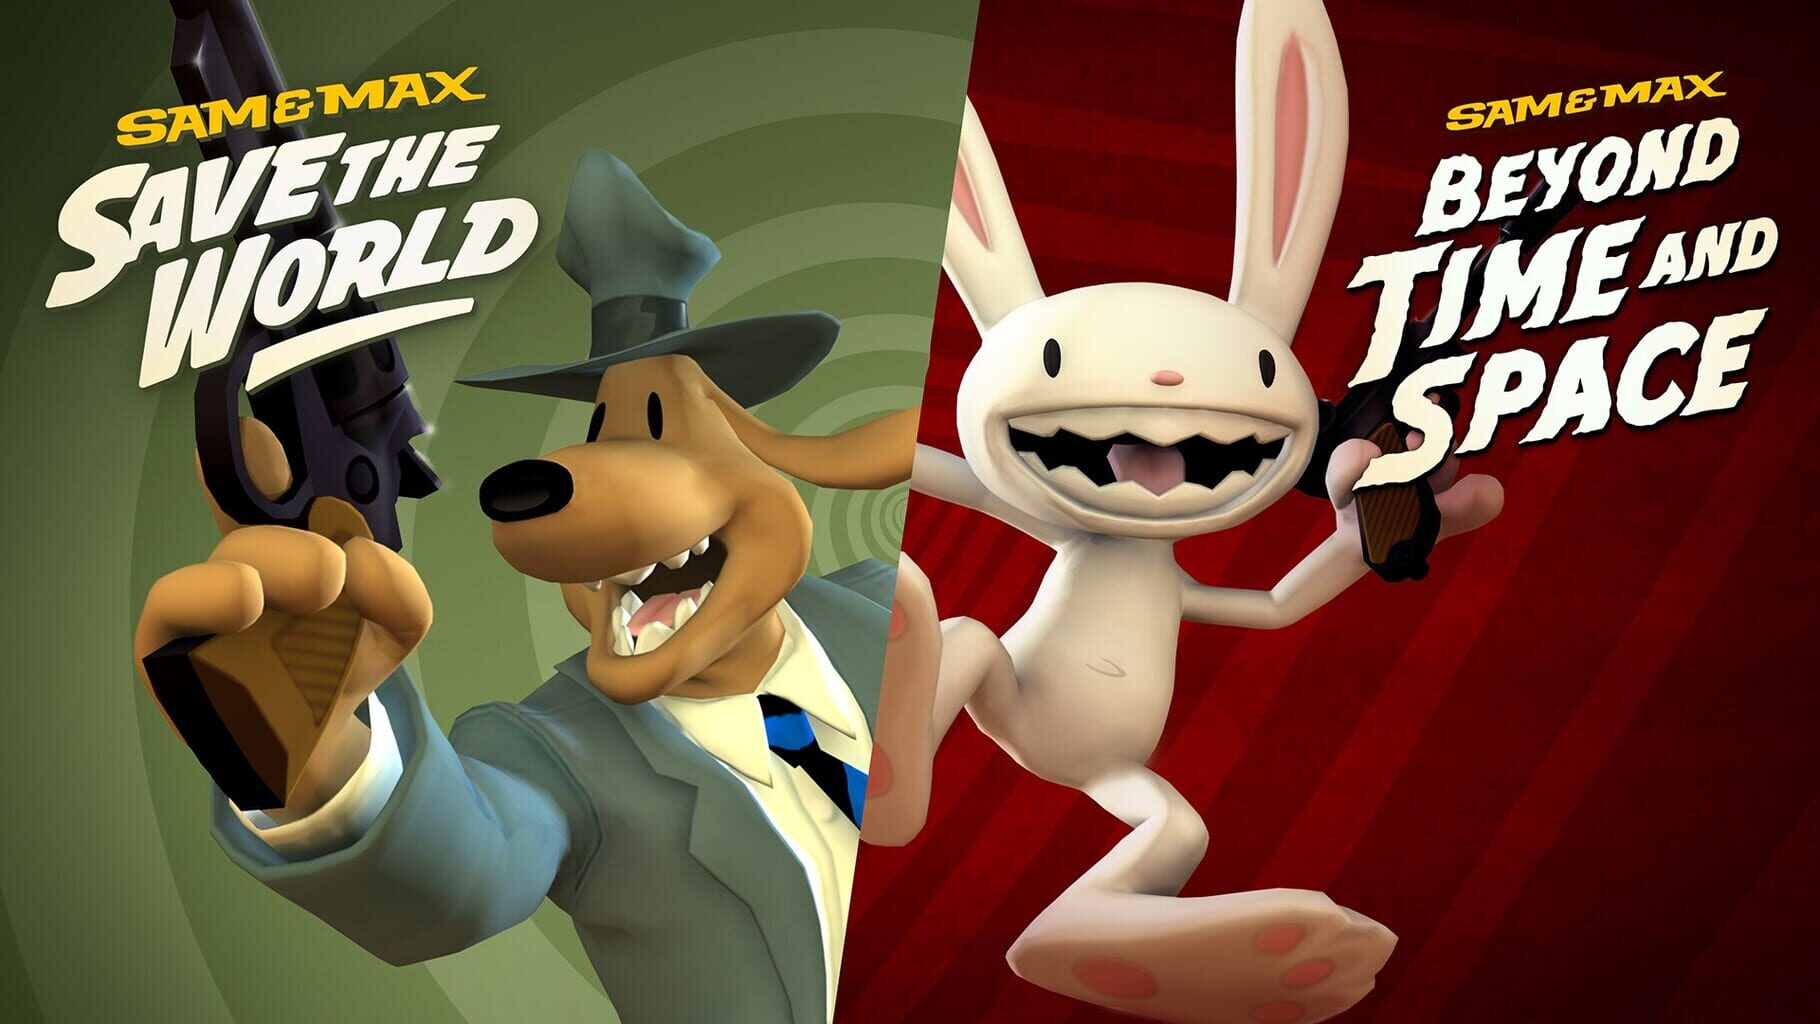 Sam & Max Save the World + Beyond Time and Space Bundle artwork